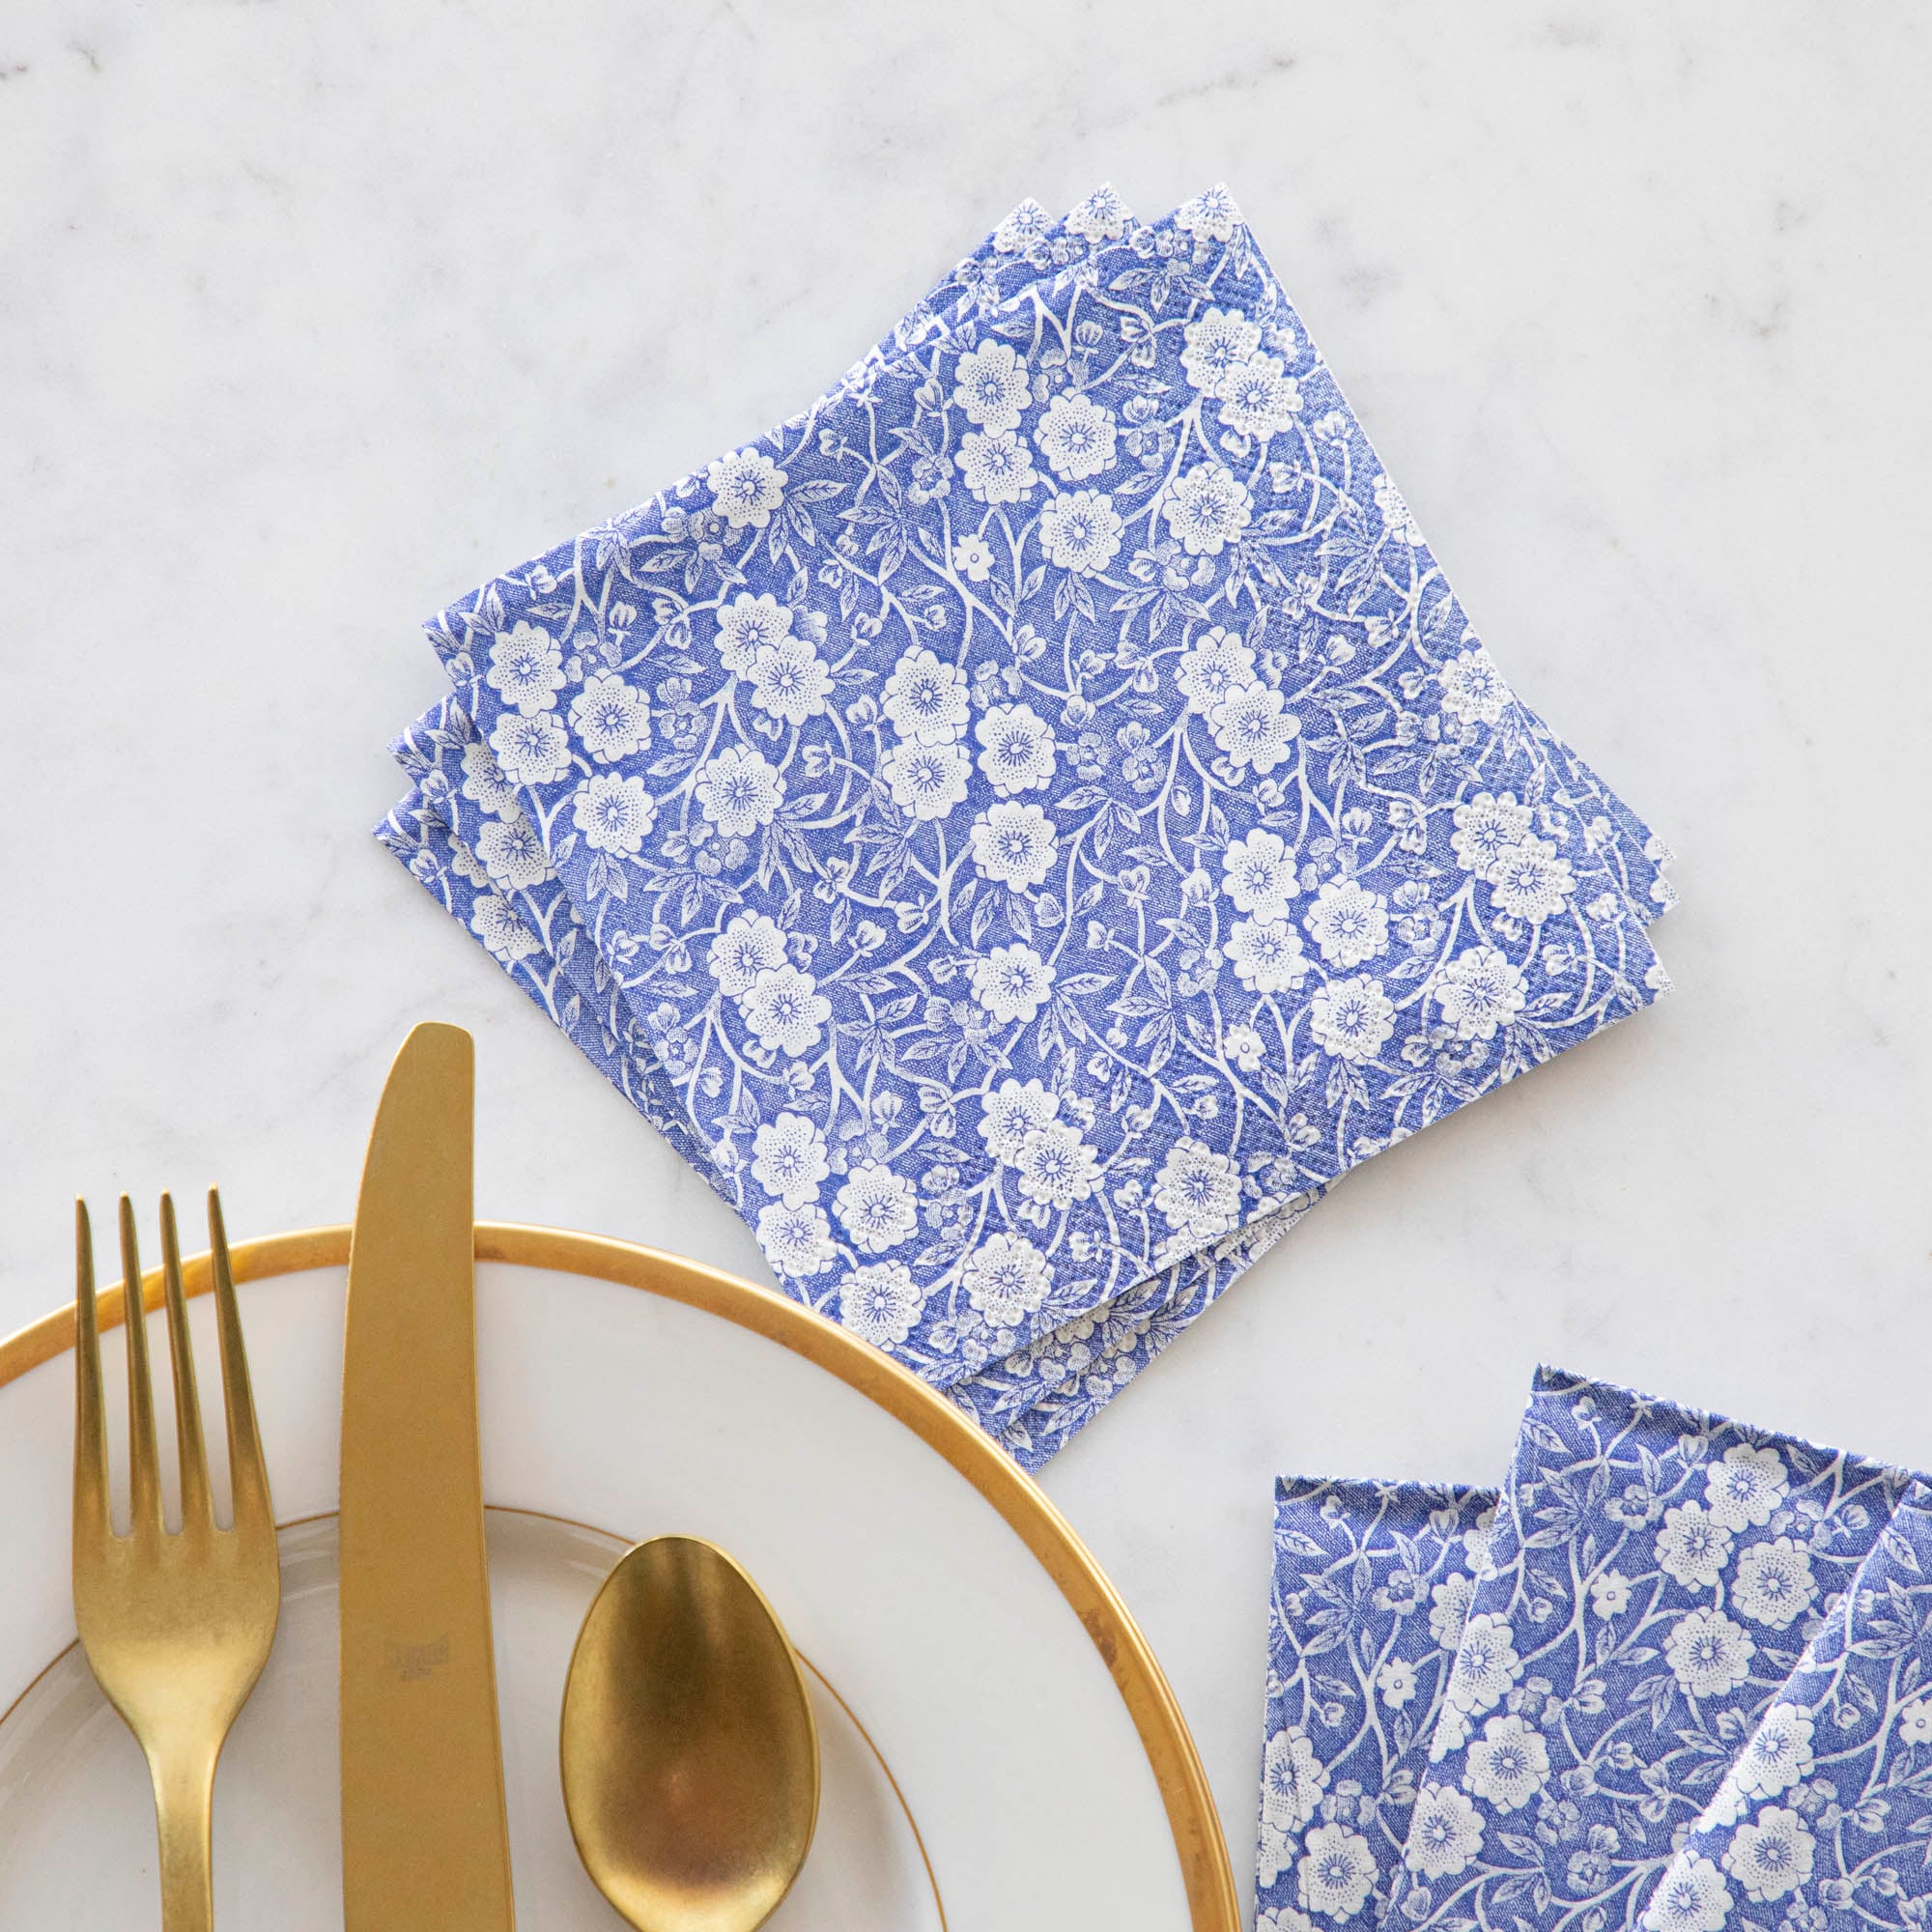 A set of beautifully decorated Blue Calico napkins by Hester &amp; Cook on a table.